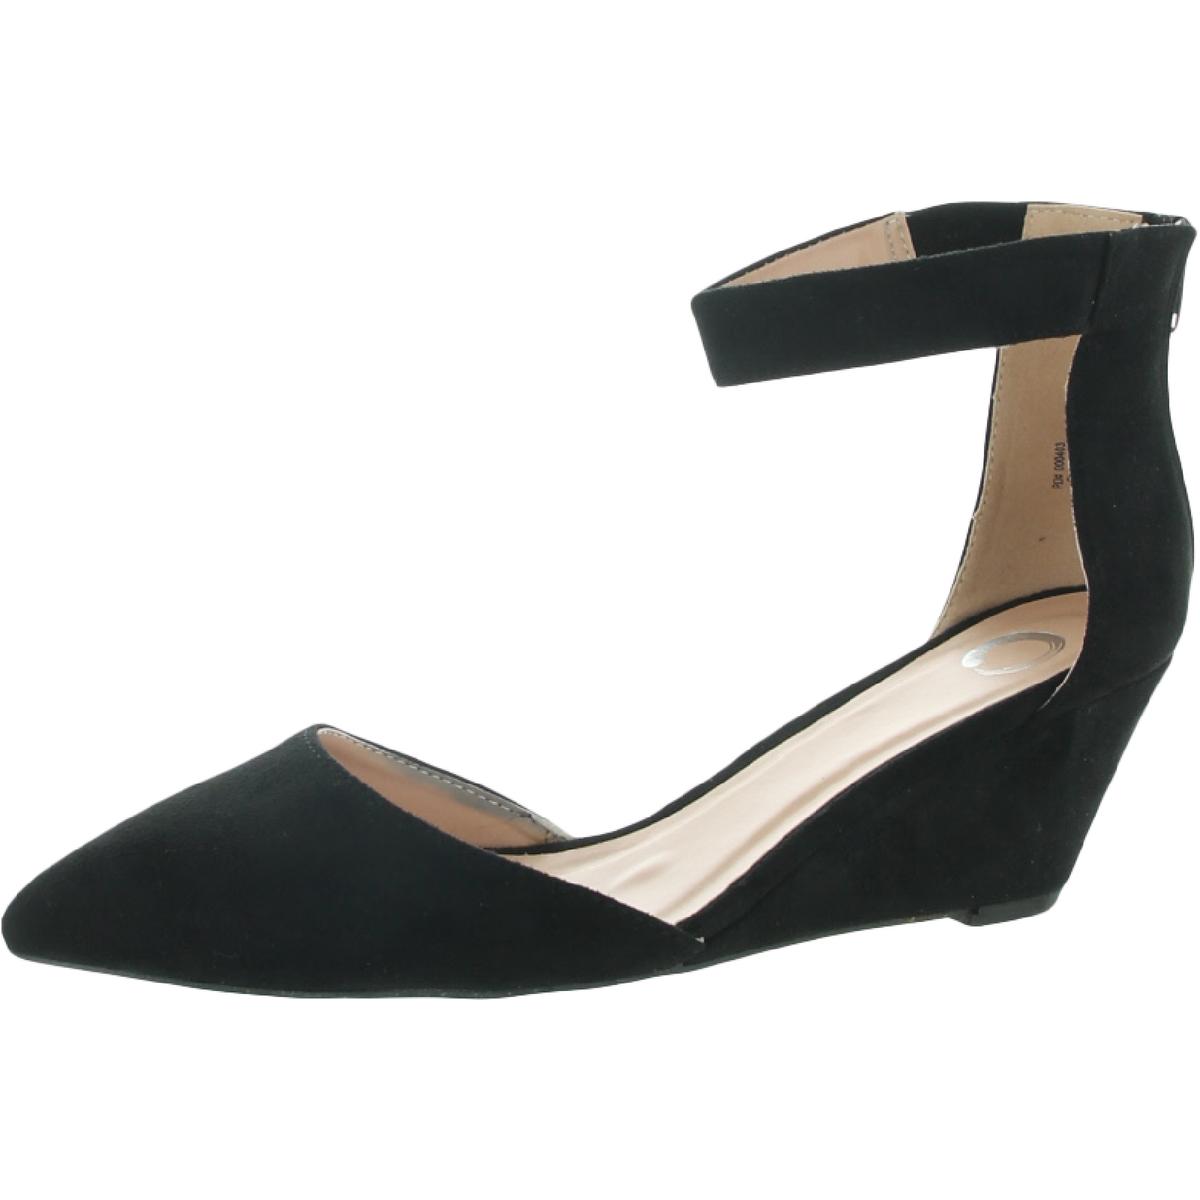 Journee Collection Womens Kova Faux Suede Wedge Heels Shoes BHFO 9360 ...